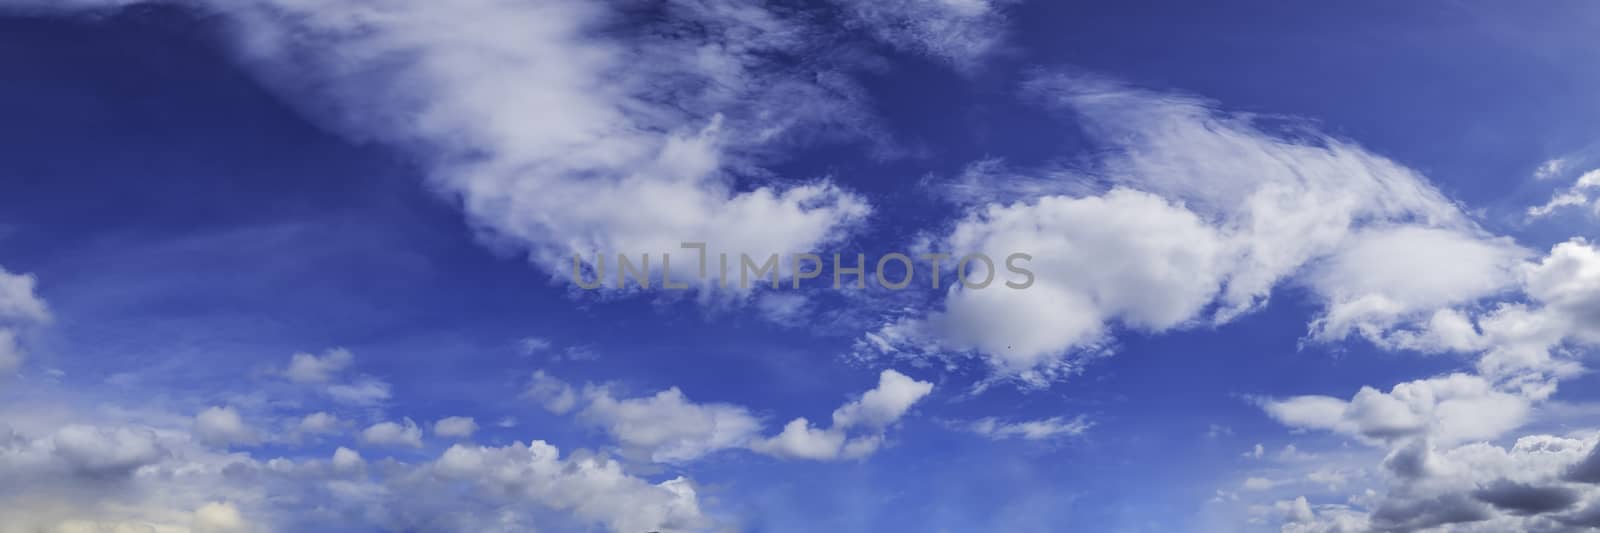 Panorama sky with cloud on a sunny day.  by Tanarch